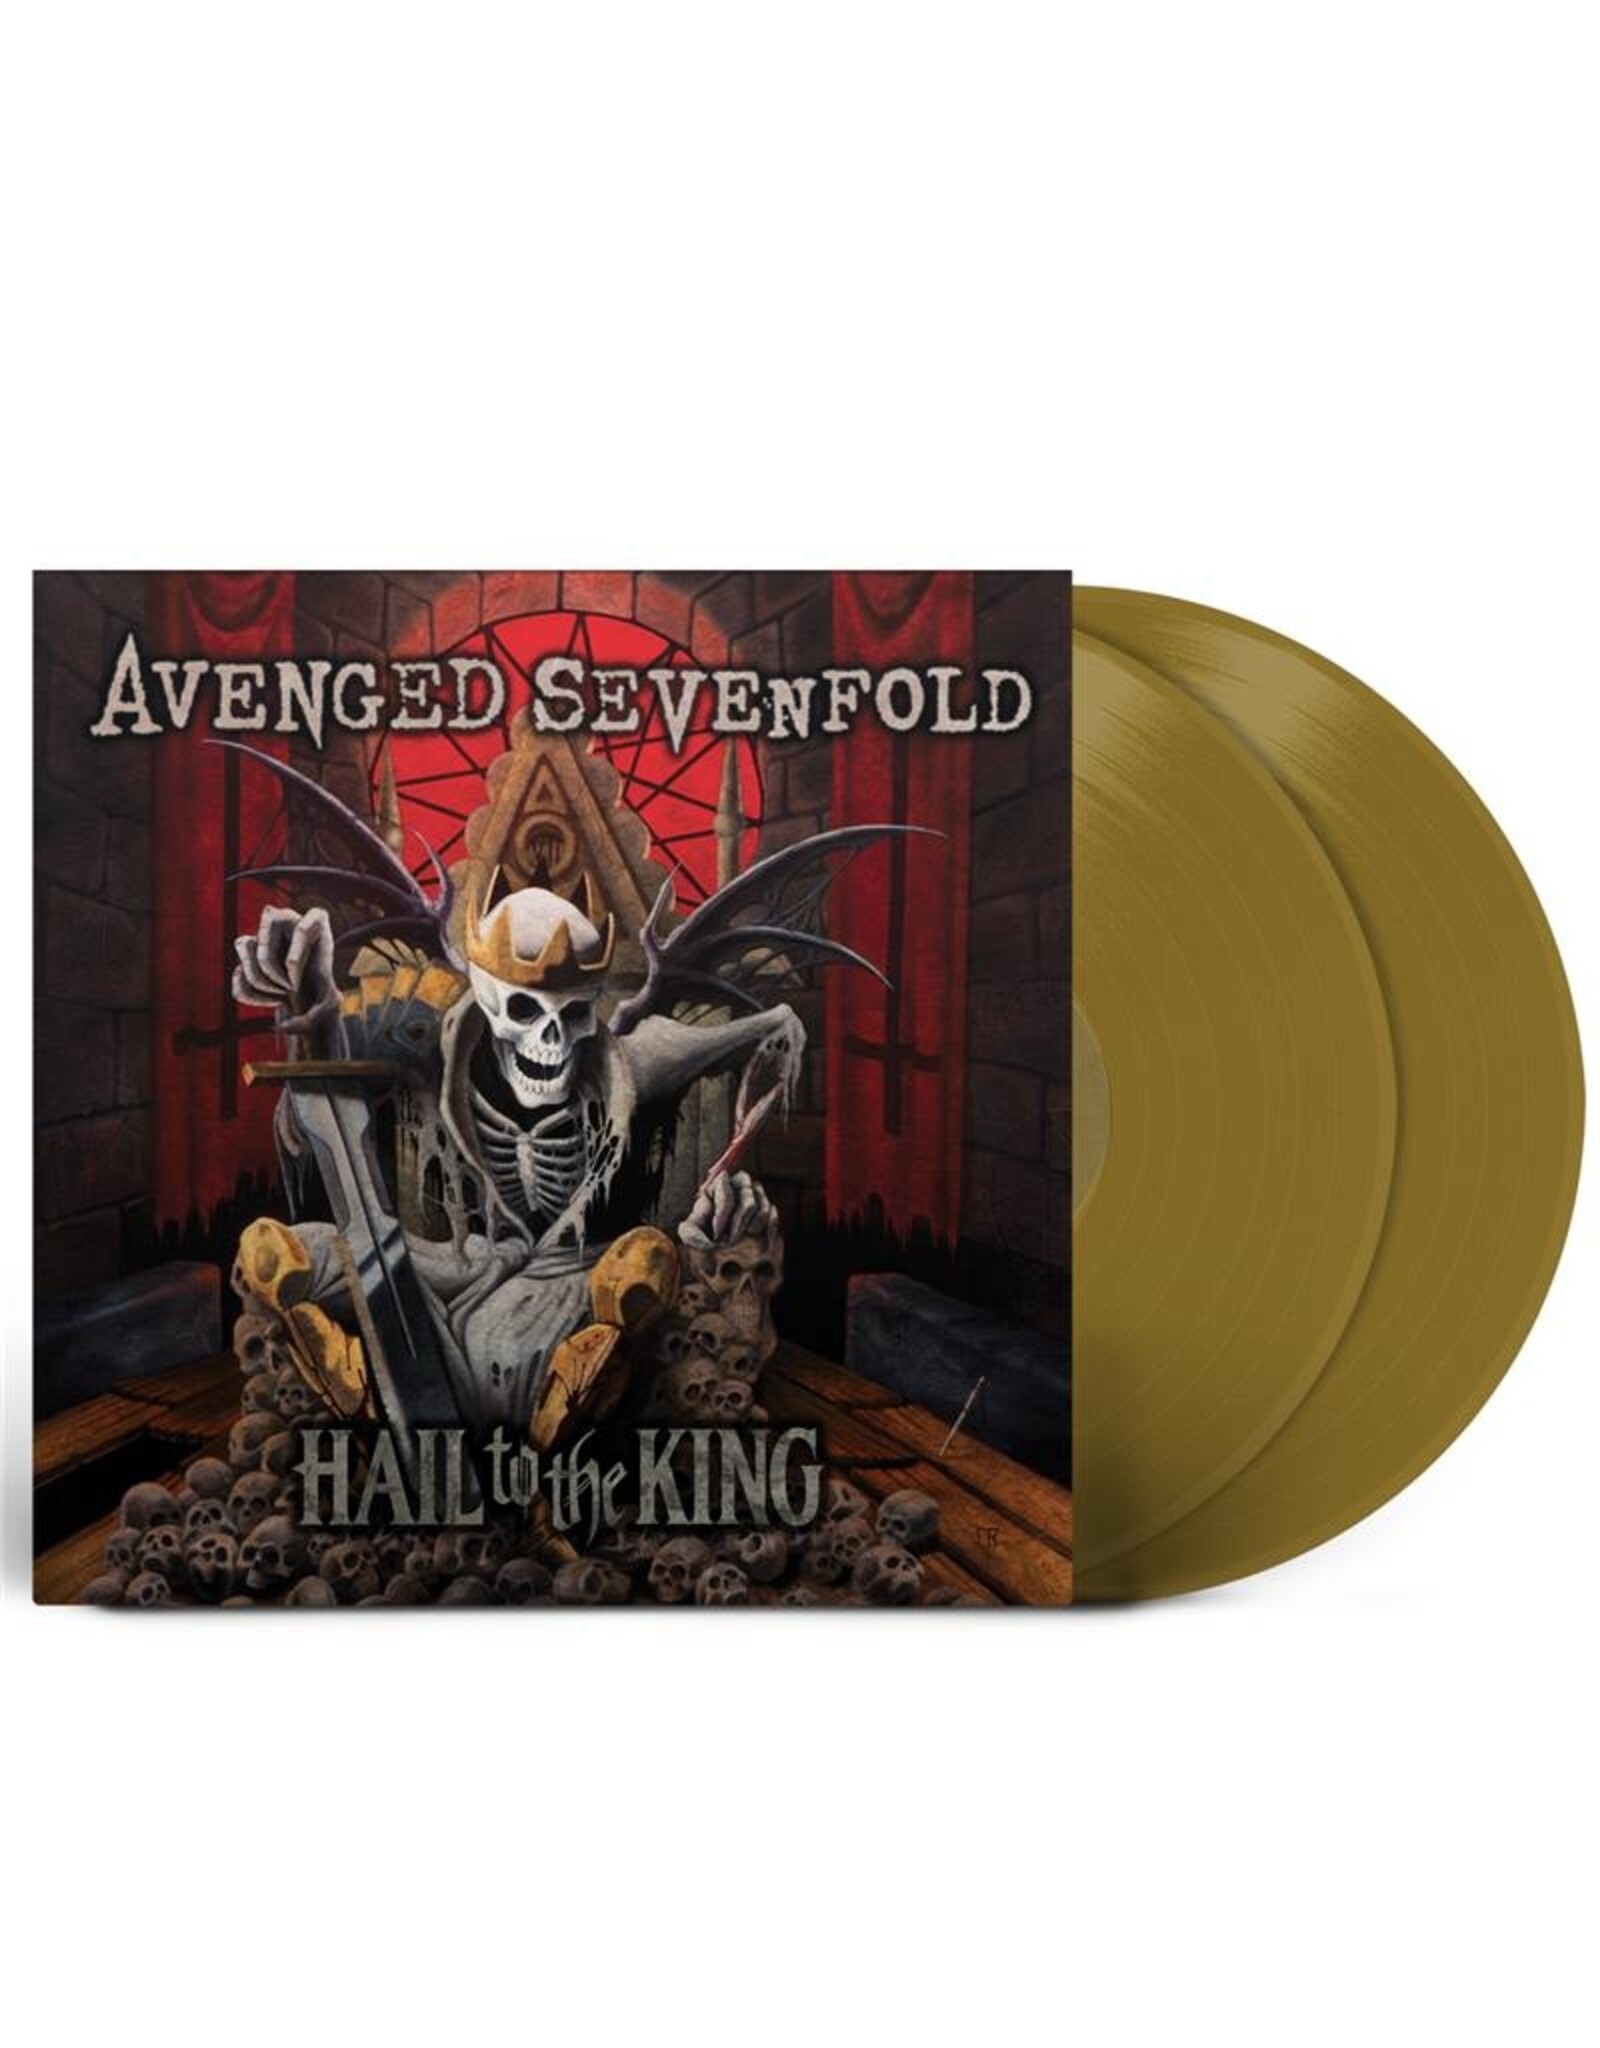 Avenged Sevenfold - Hail To The King  (10th Anniversary) [Gold Vinyl]